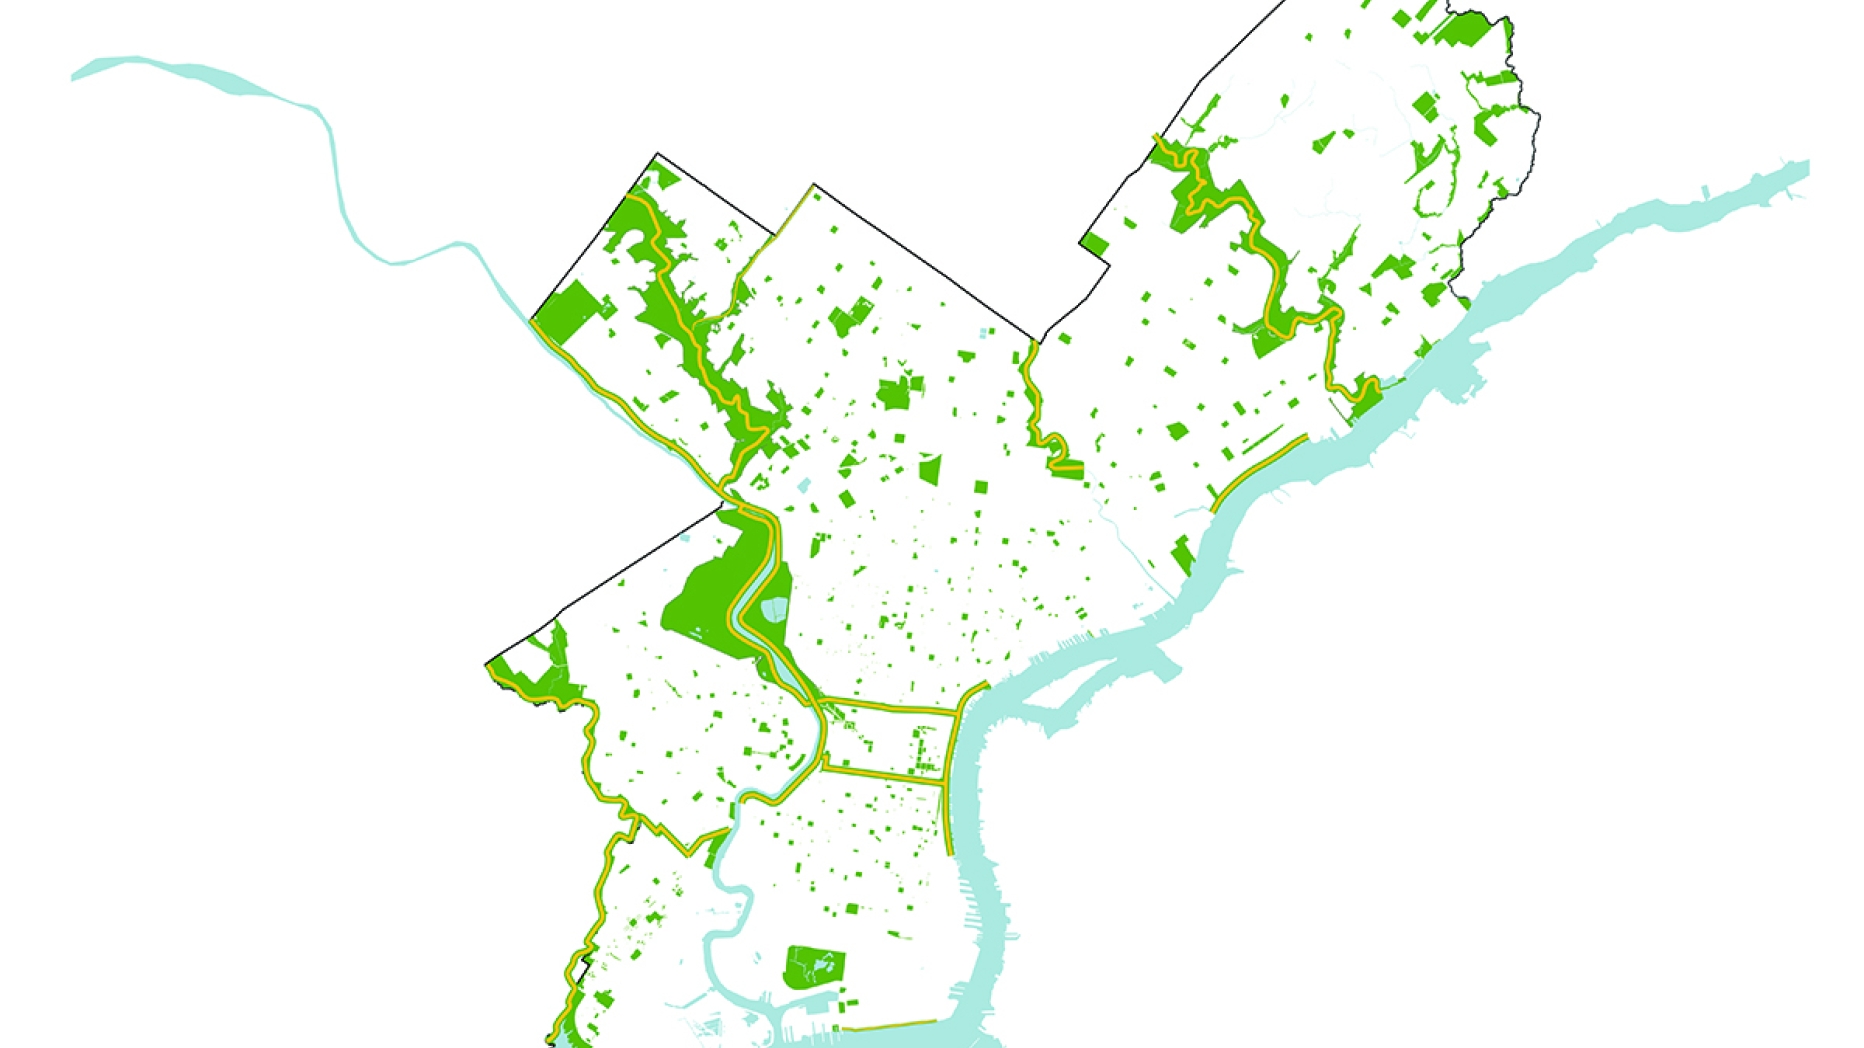 Map of Philadelphia featuring only green spaces.